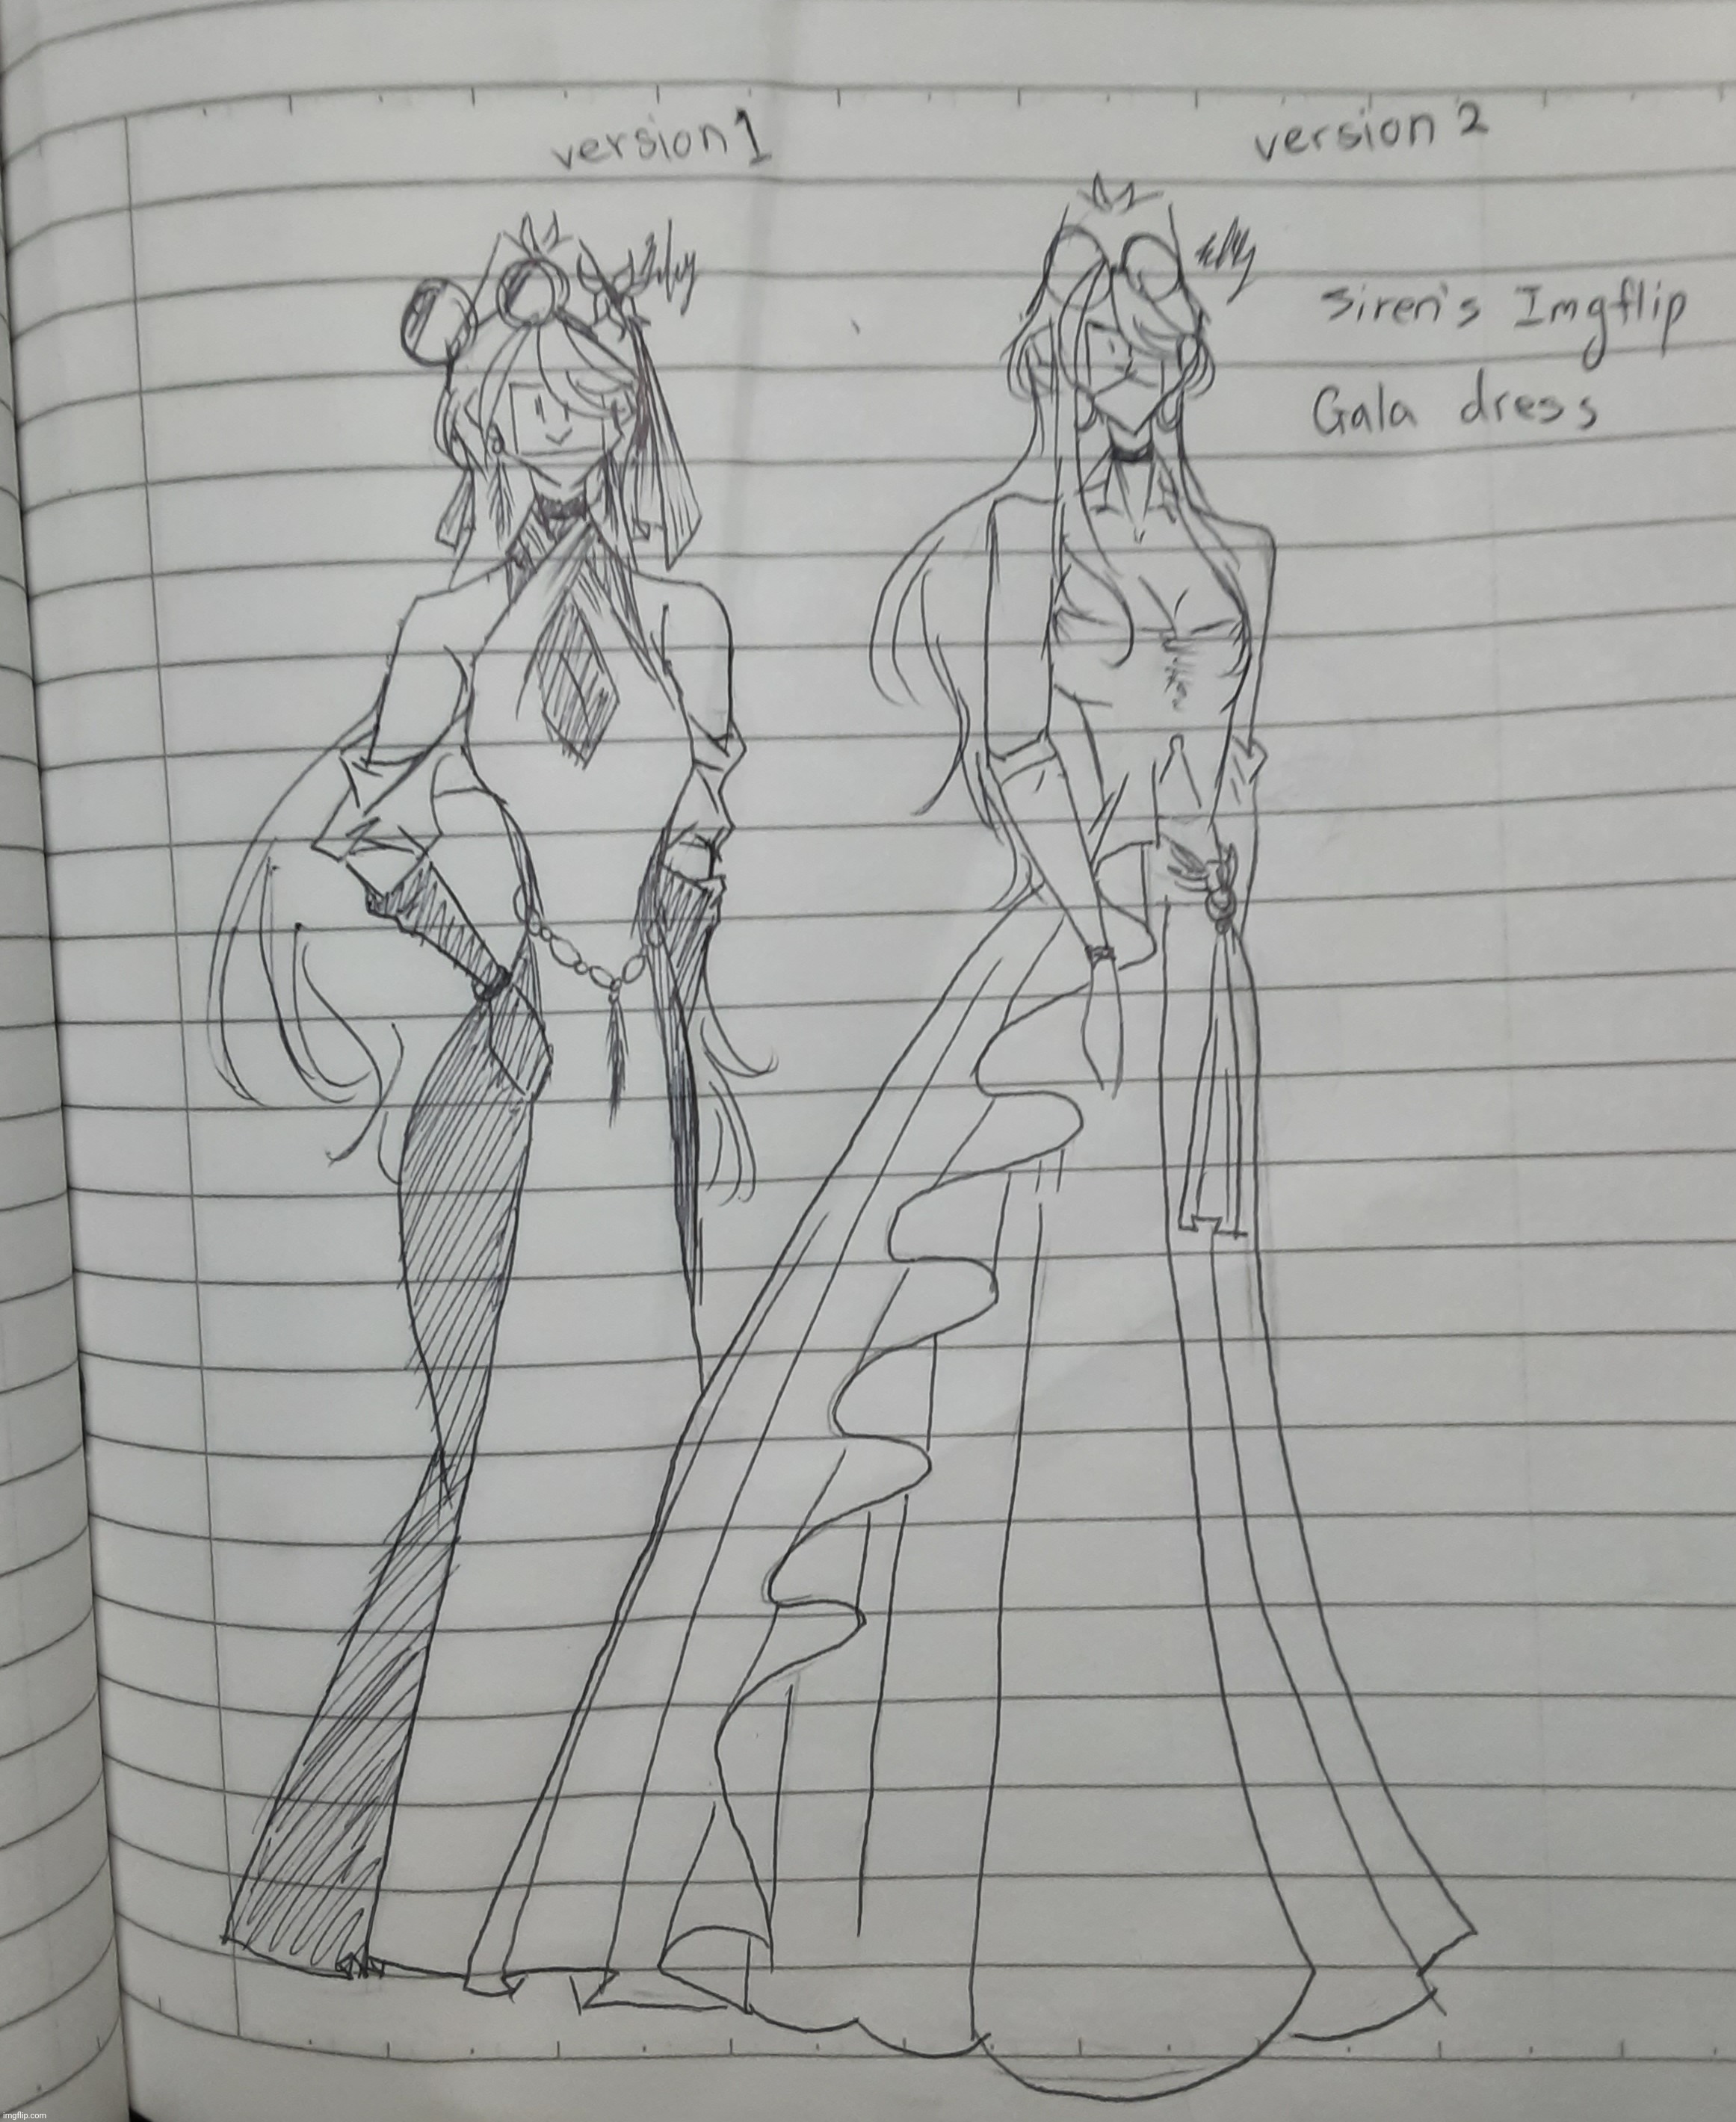 These are the designs to Siren's Imgflip Gala dress (I used the 2nd one) | made w/ Imgflip meme maker